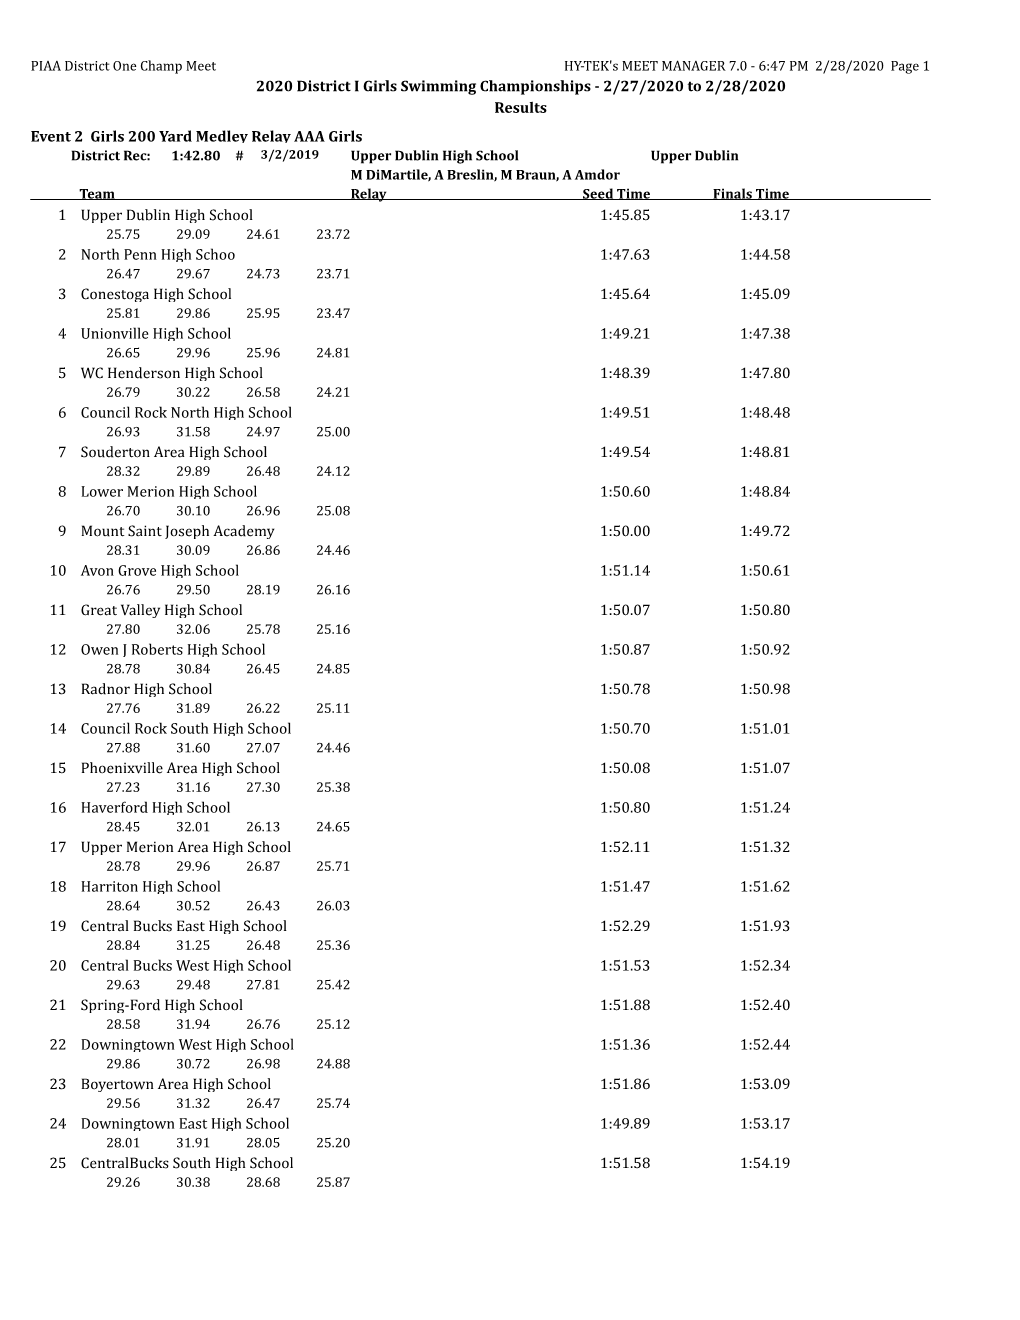 2020 District I Girls Swimming Championships - 2/27/2020 to 2/28/2020 Results